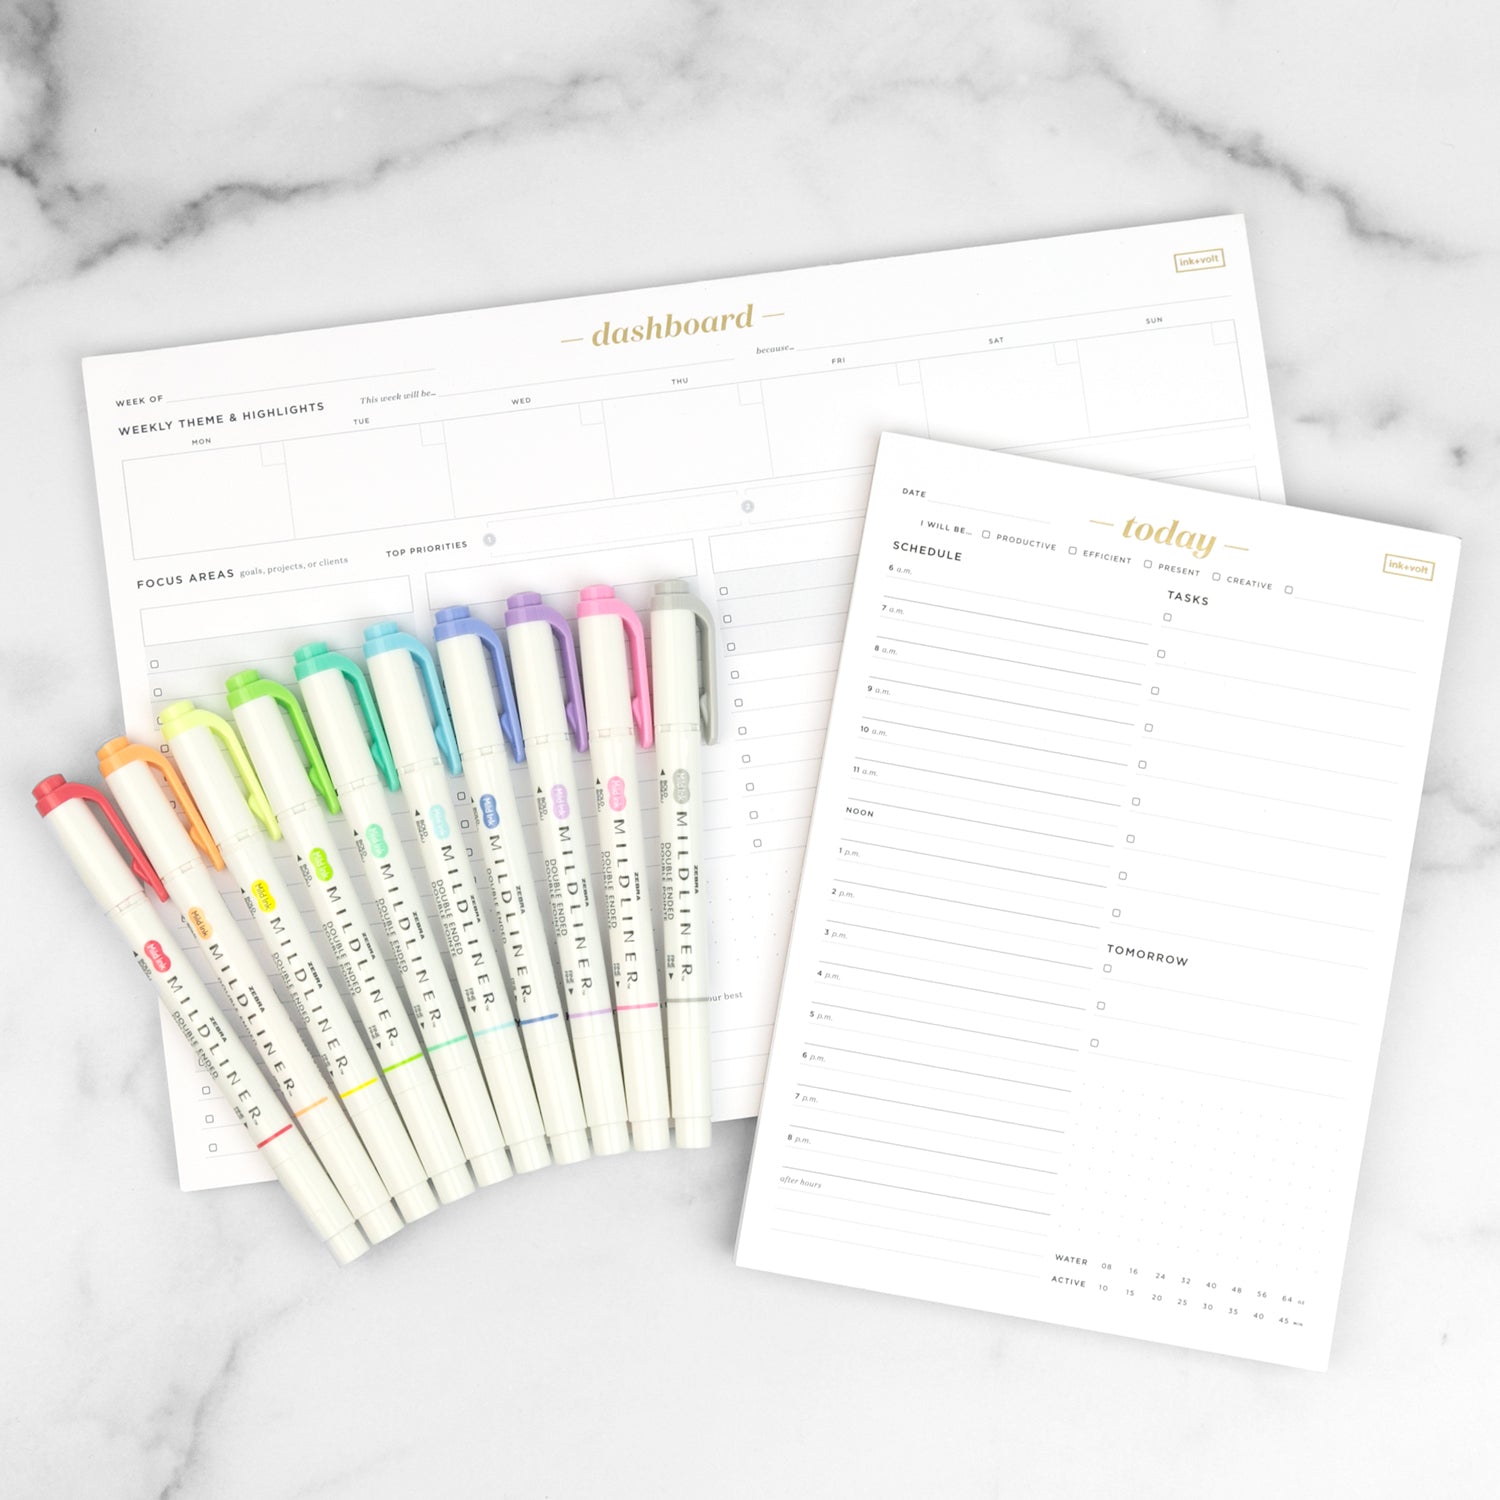 24-Hour Time Block Number Stickers for Planners & Bullet Journals